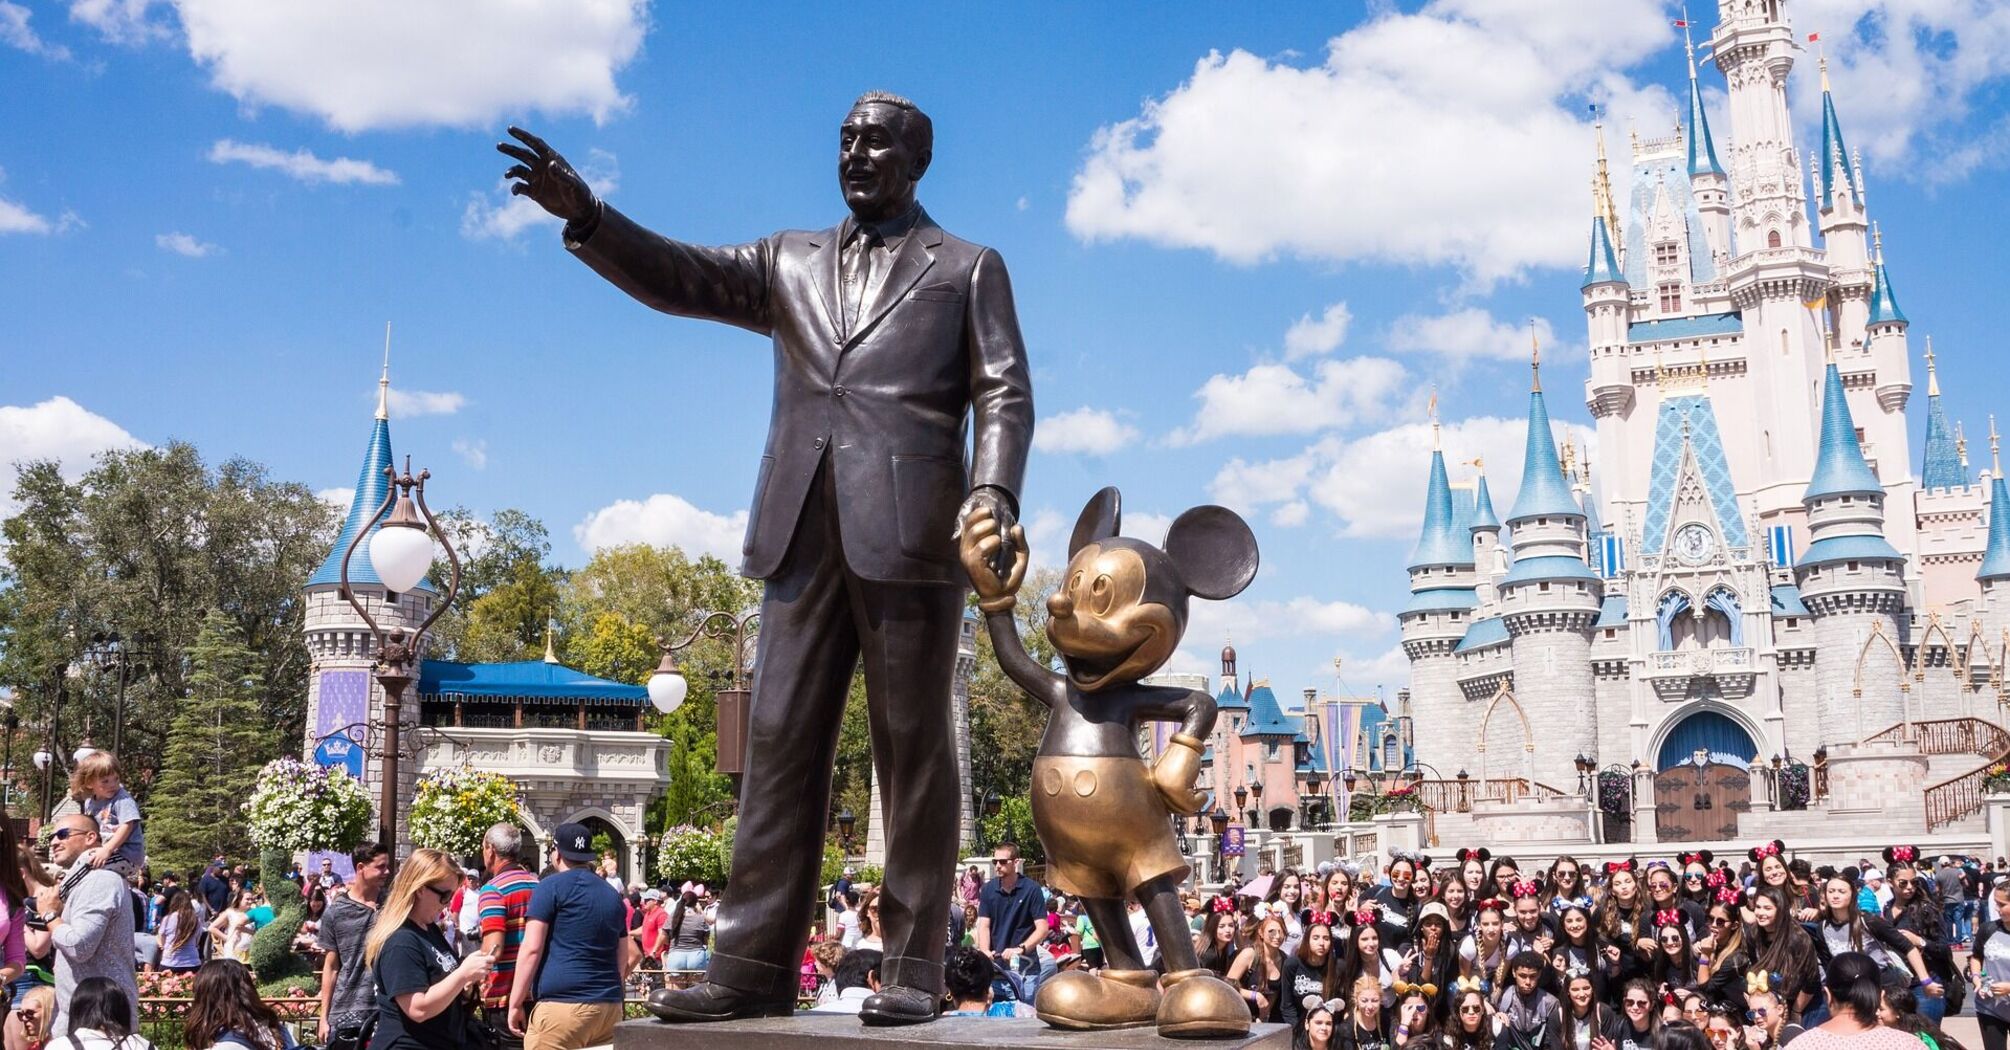 Statue of Walt Disney holding hands with Mickey Mouse in front of Cinderella Castle at a crowded Disney theme park